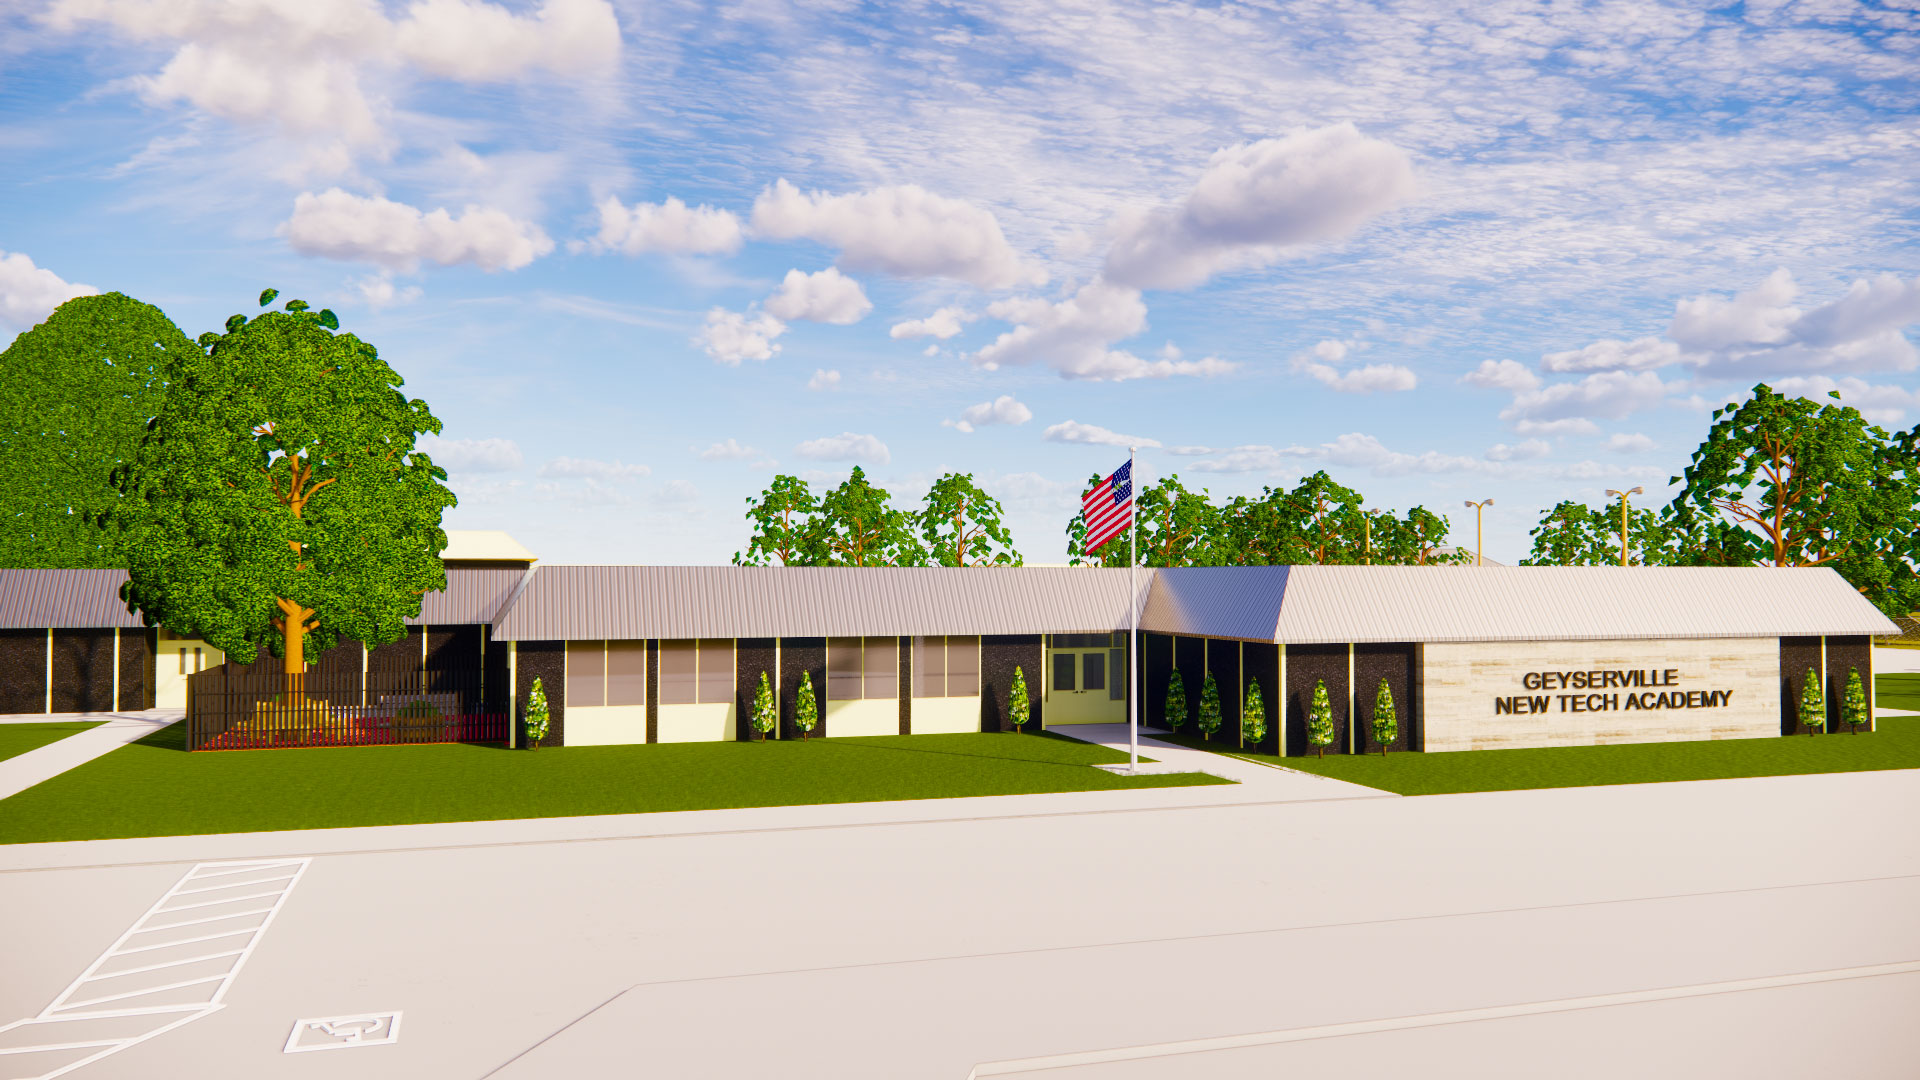 Rendering of exterior of school, with paneled black walls and white roof.